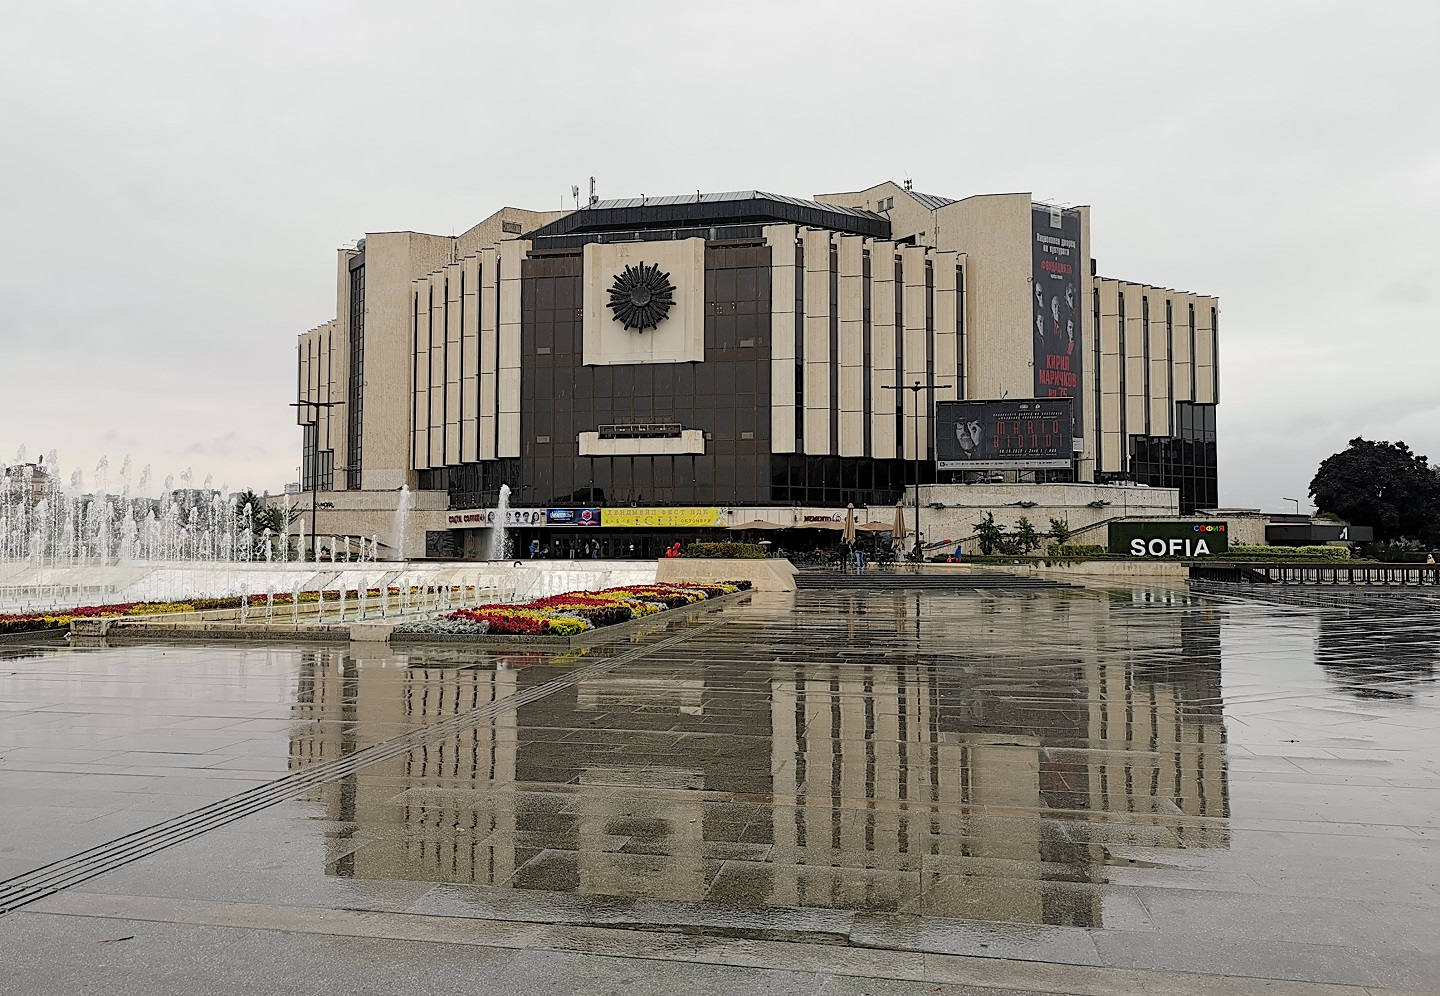 The National Palace of Culture (NDK) in Sofia